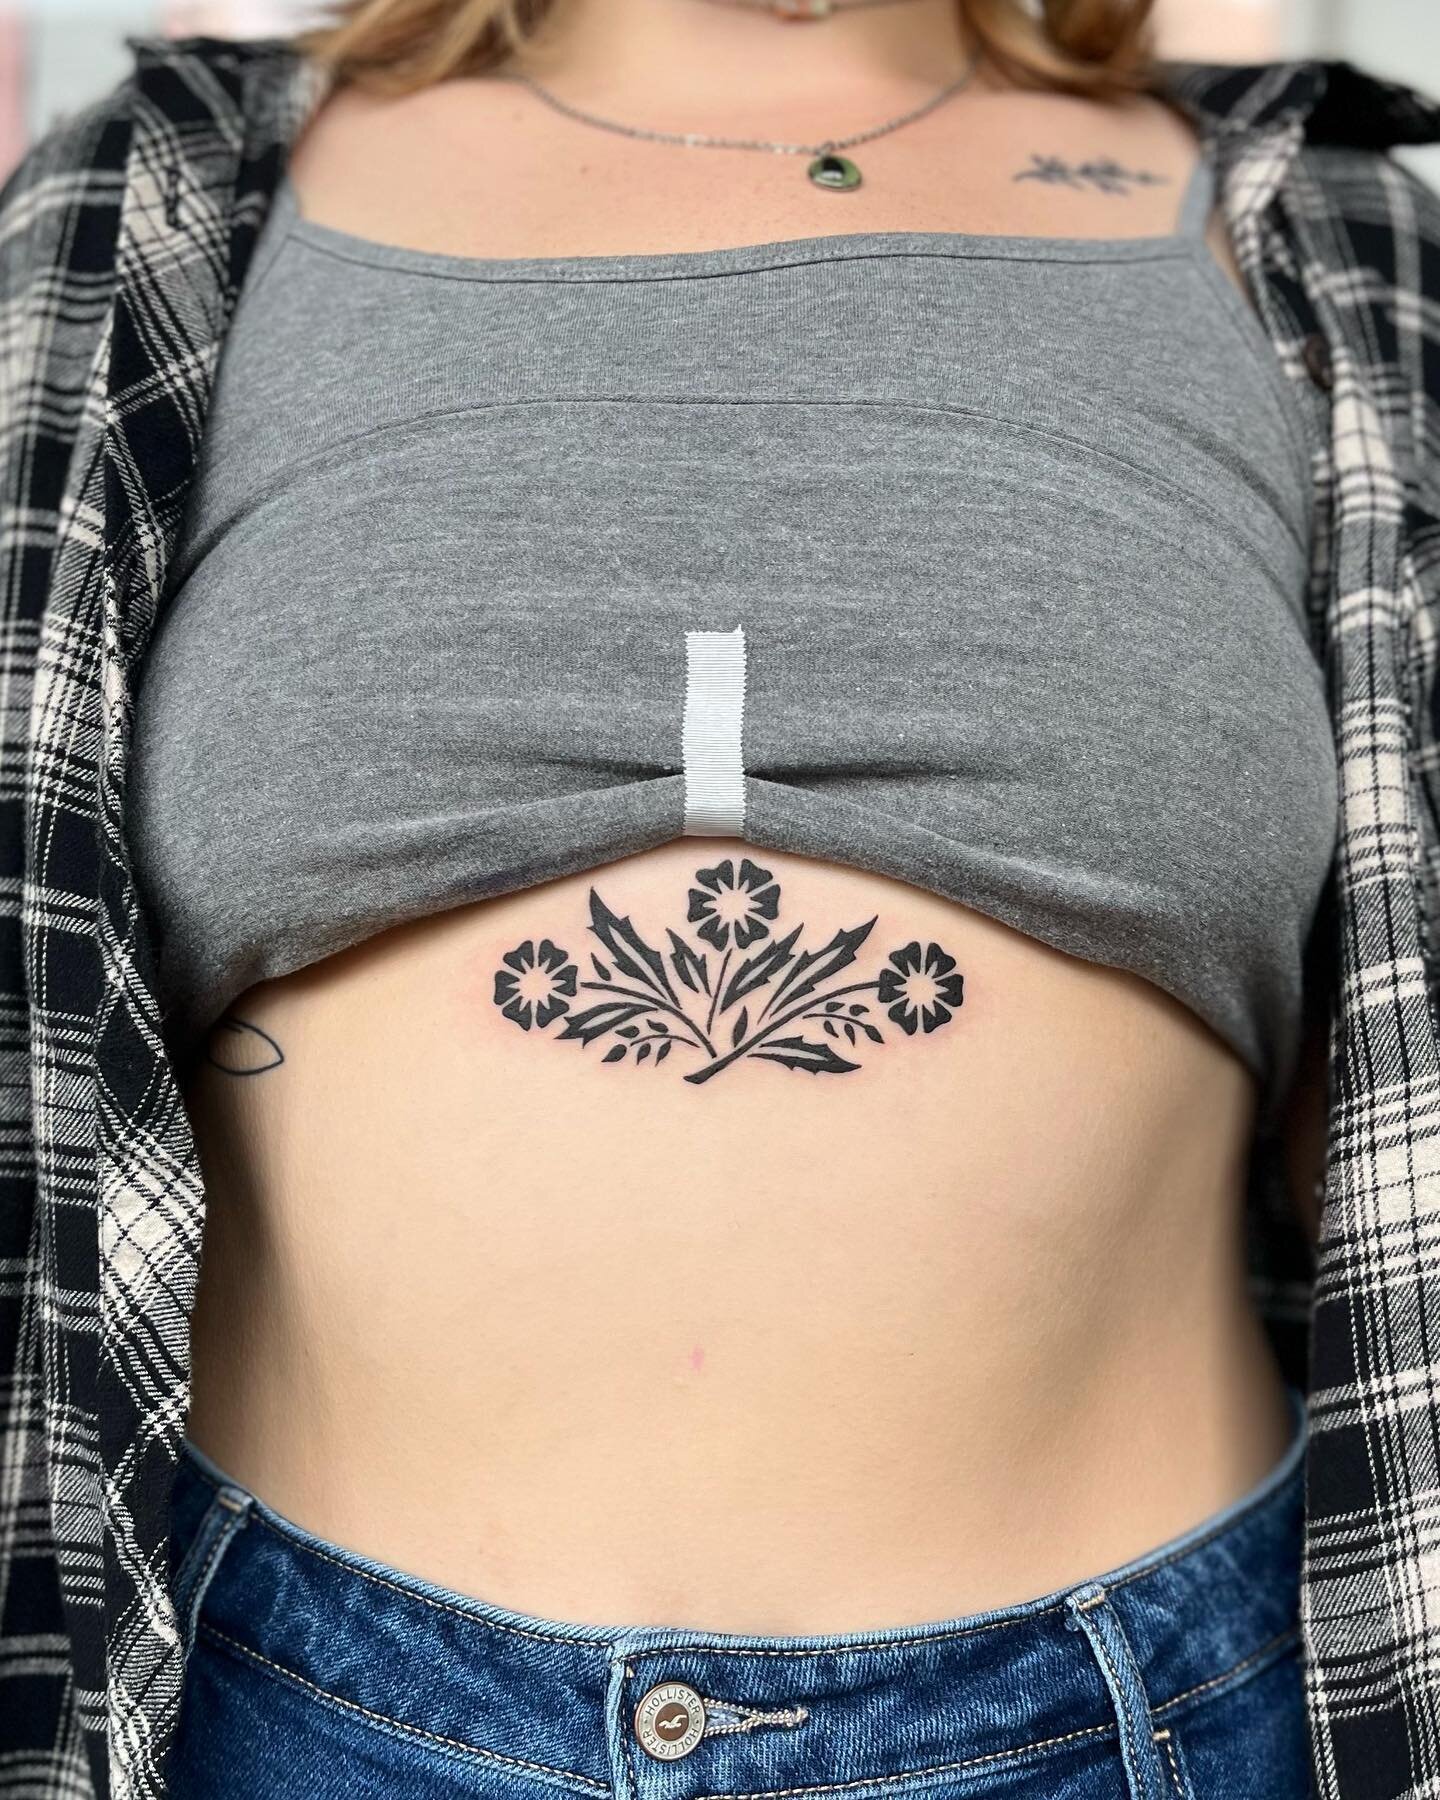 We love corningware 🌸 thanks for looking! 
.
.
.
.
.
.
.
.
.
.
.
.
.
#apprentice #apprenticetattoo #sternumtattoo #corningware #blackworktattoo